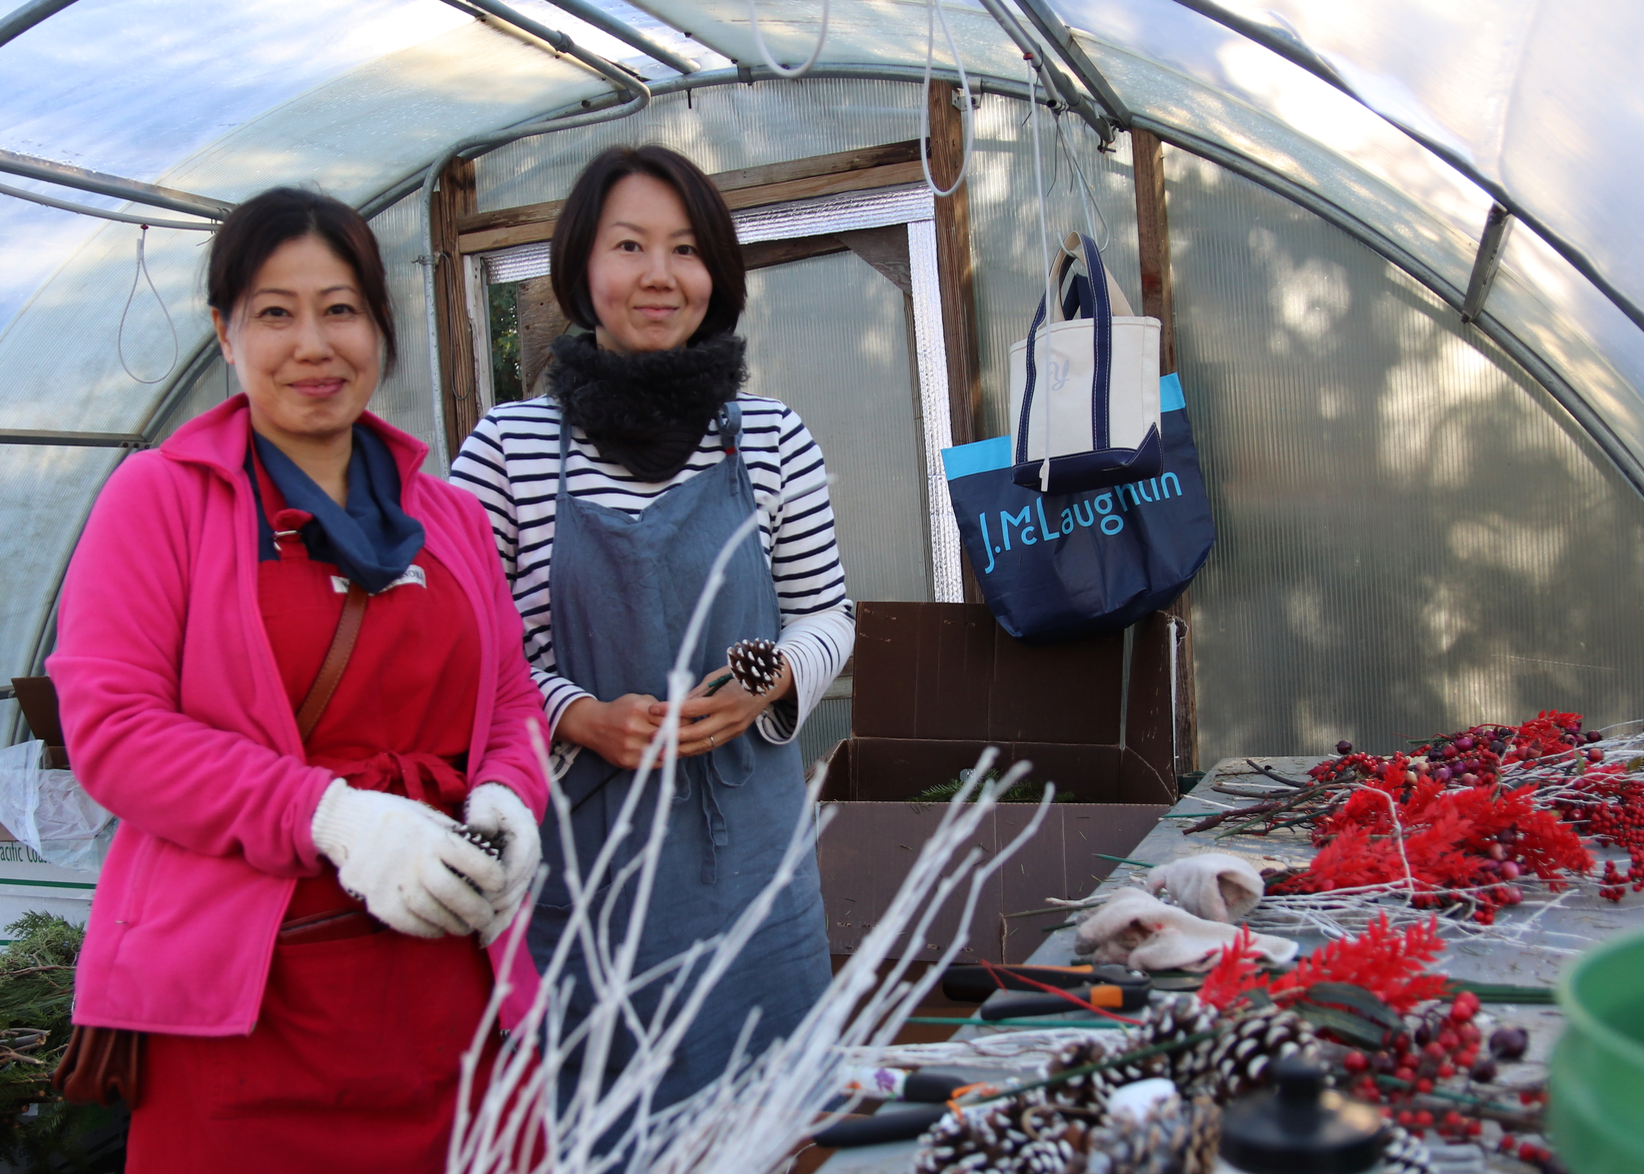 Etsuko Tulloch and Yoko Takata arranging some of the portions of greenery baskets that are recycled year to year. Nov 21, 2019 Photo: Leslie Yager